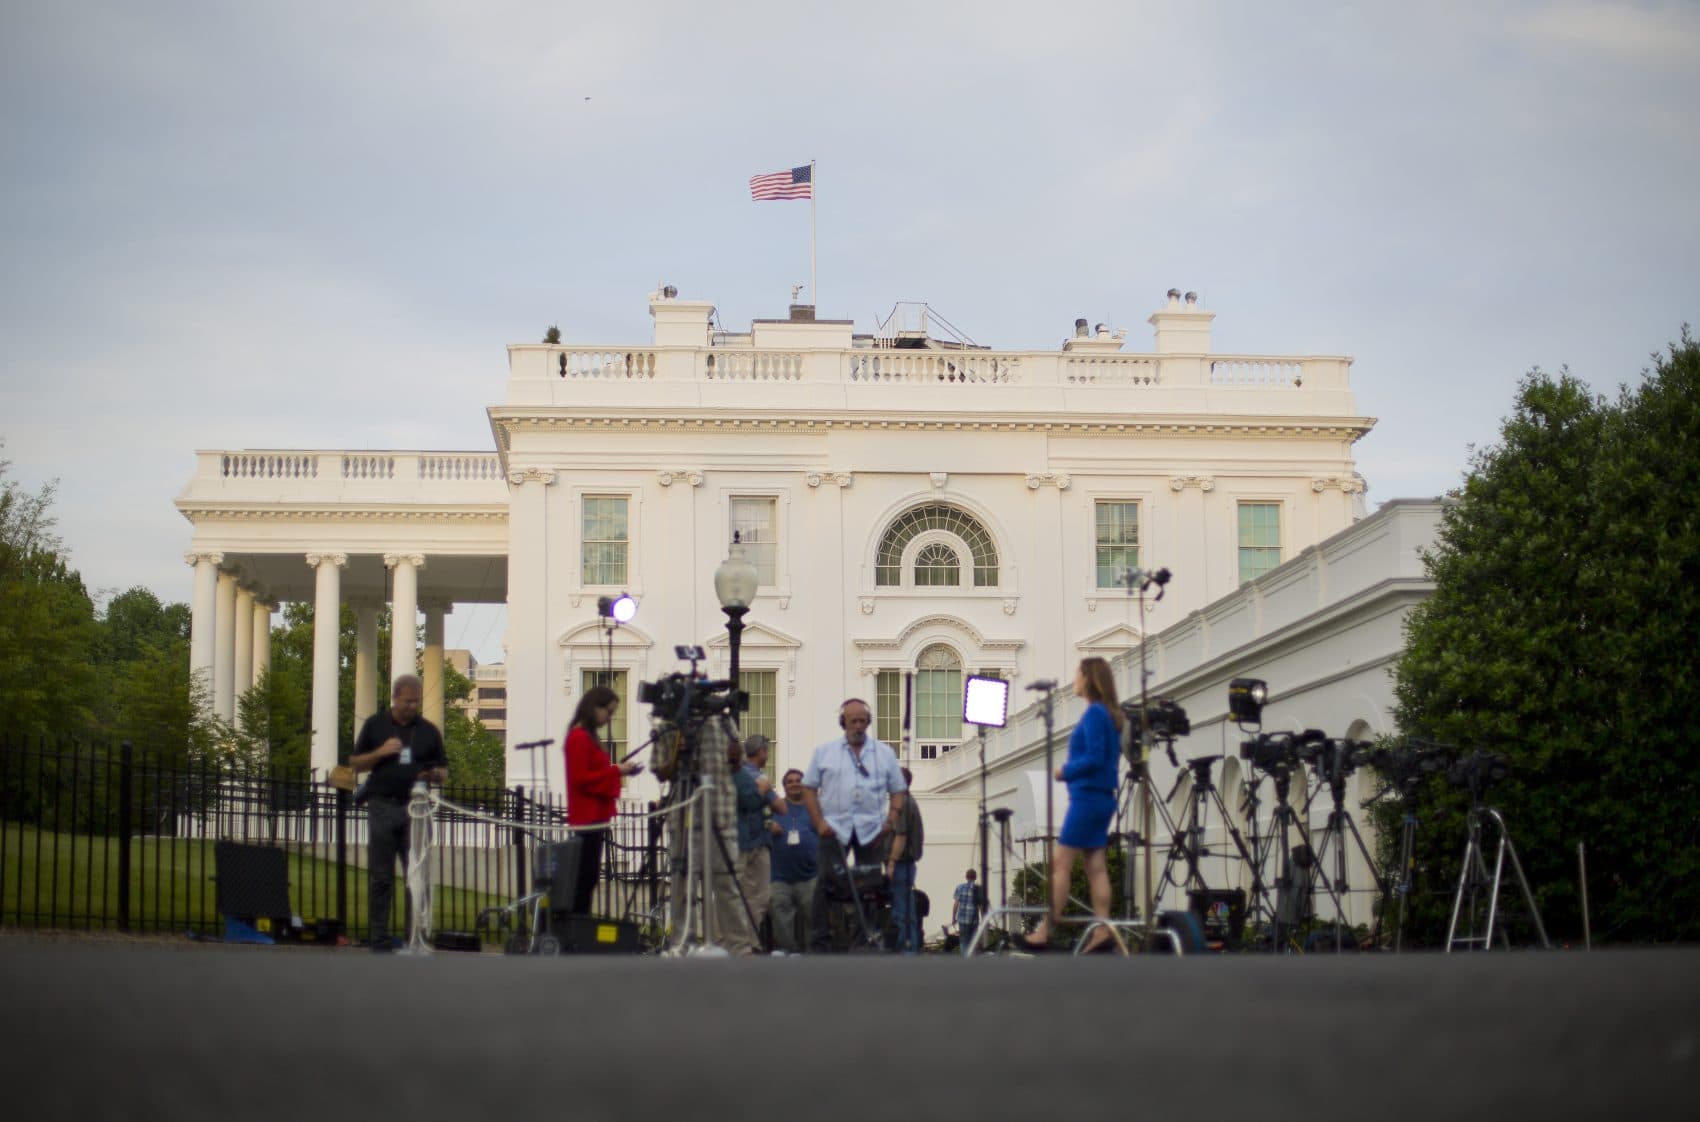 The White House distracts, talk of impeachment abounds and malicious software makes its way around the globe. All that and more in Tom Keane's roundup of the week in the news. Pictured: Television network crews begin their evening news broadcast outside the White House, Wednesday, May 17, 2017. (Pablo Martinez Monsivais/AP)